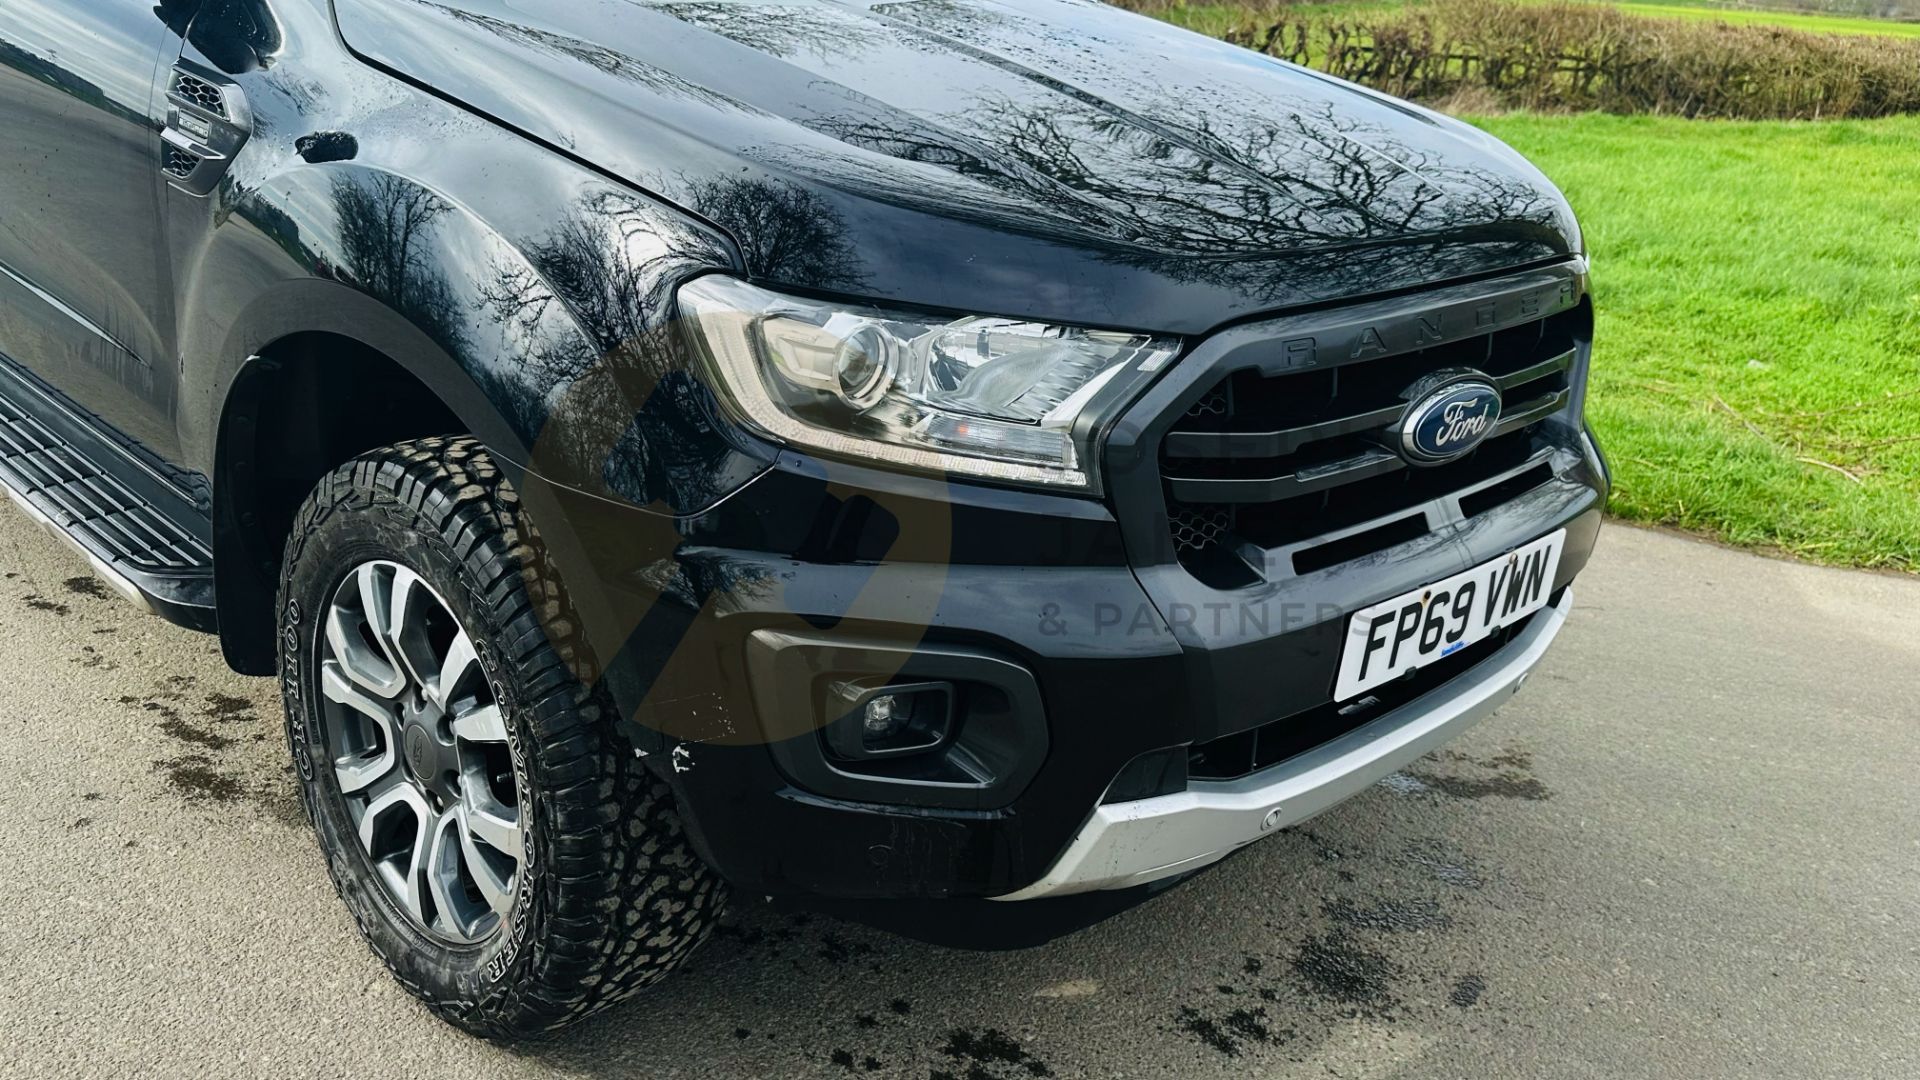 FORD RANGER *WILDTRAK* DOUBLE CAB PICK-UP (2020 - FACELIFT MODEL) 2.0 TDCI 'ECOBLUE' - 10 SPEED AUTO - Image 15 of 45